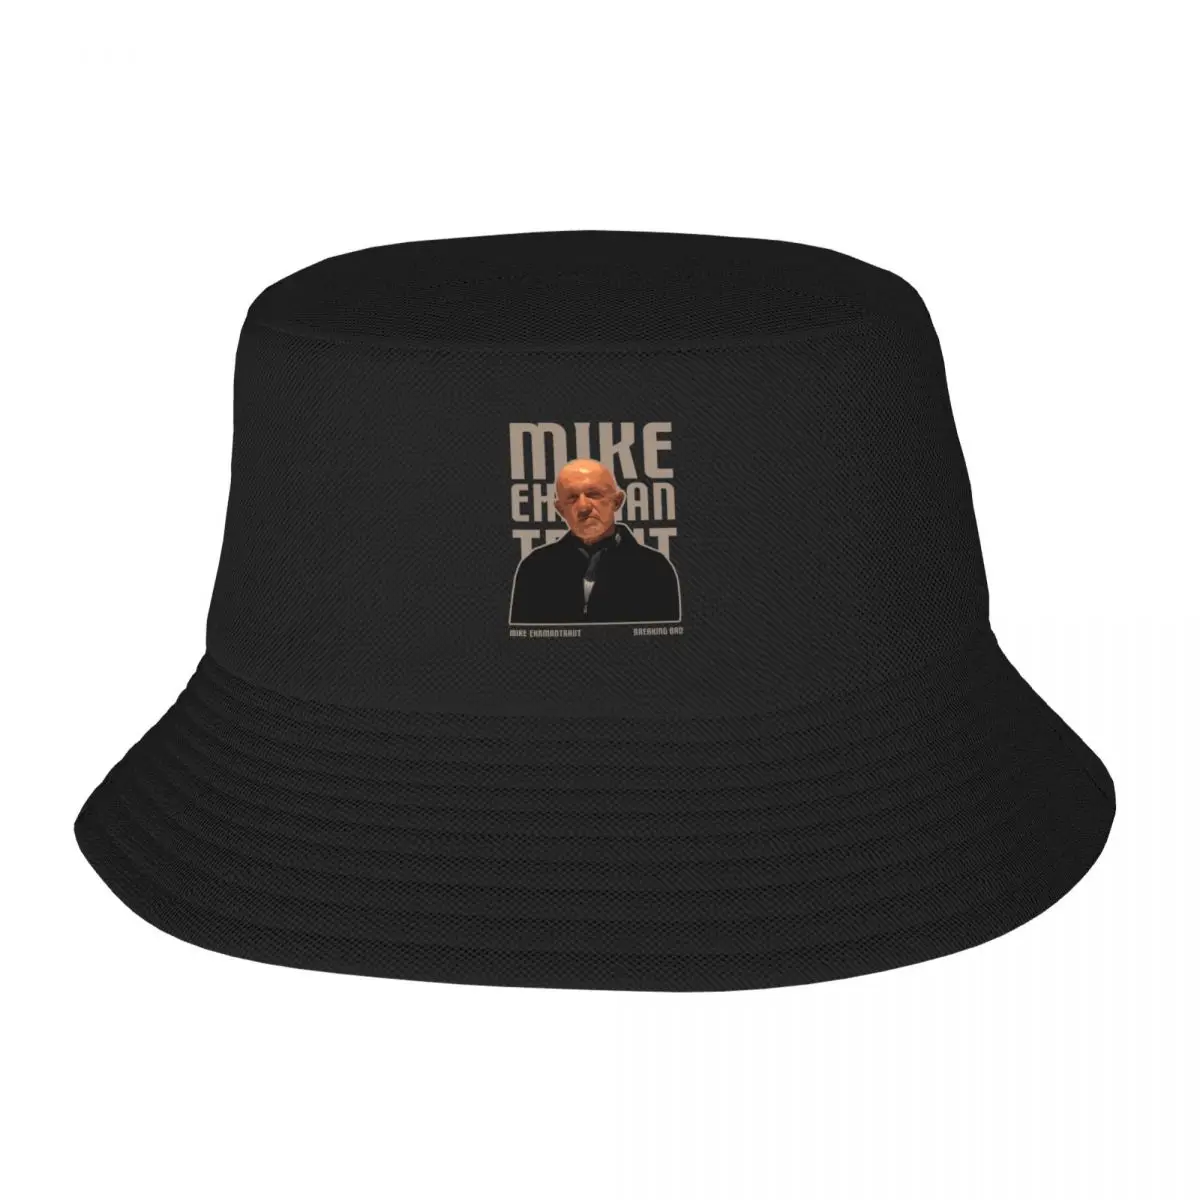 

New mike ehrmantraut - angry Bucket Hat Luxury Brand Golf Wear Hats For Men Women's